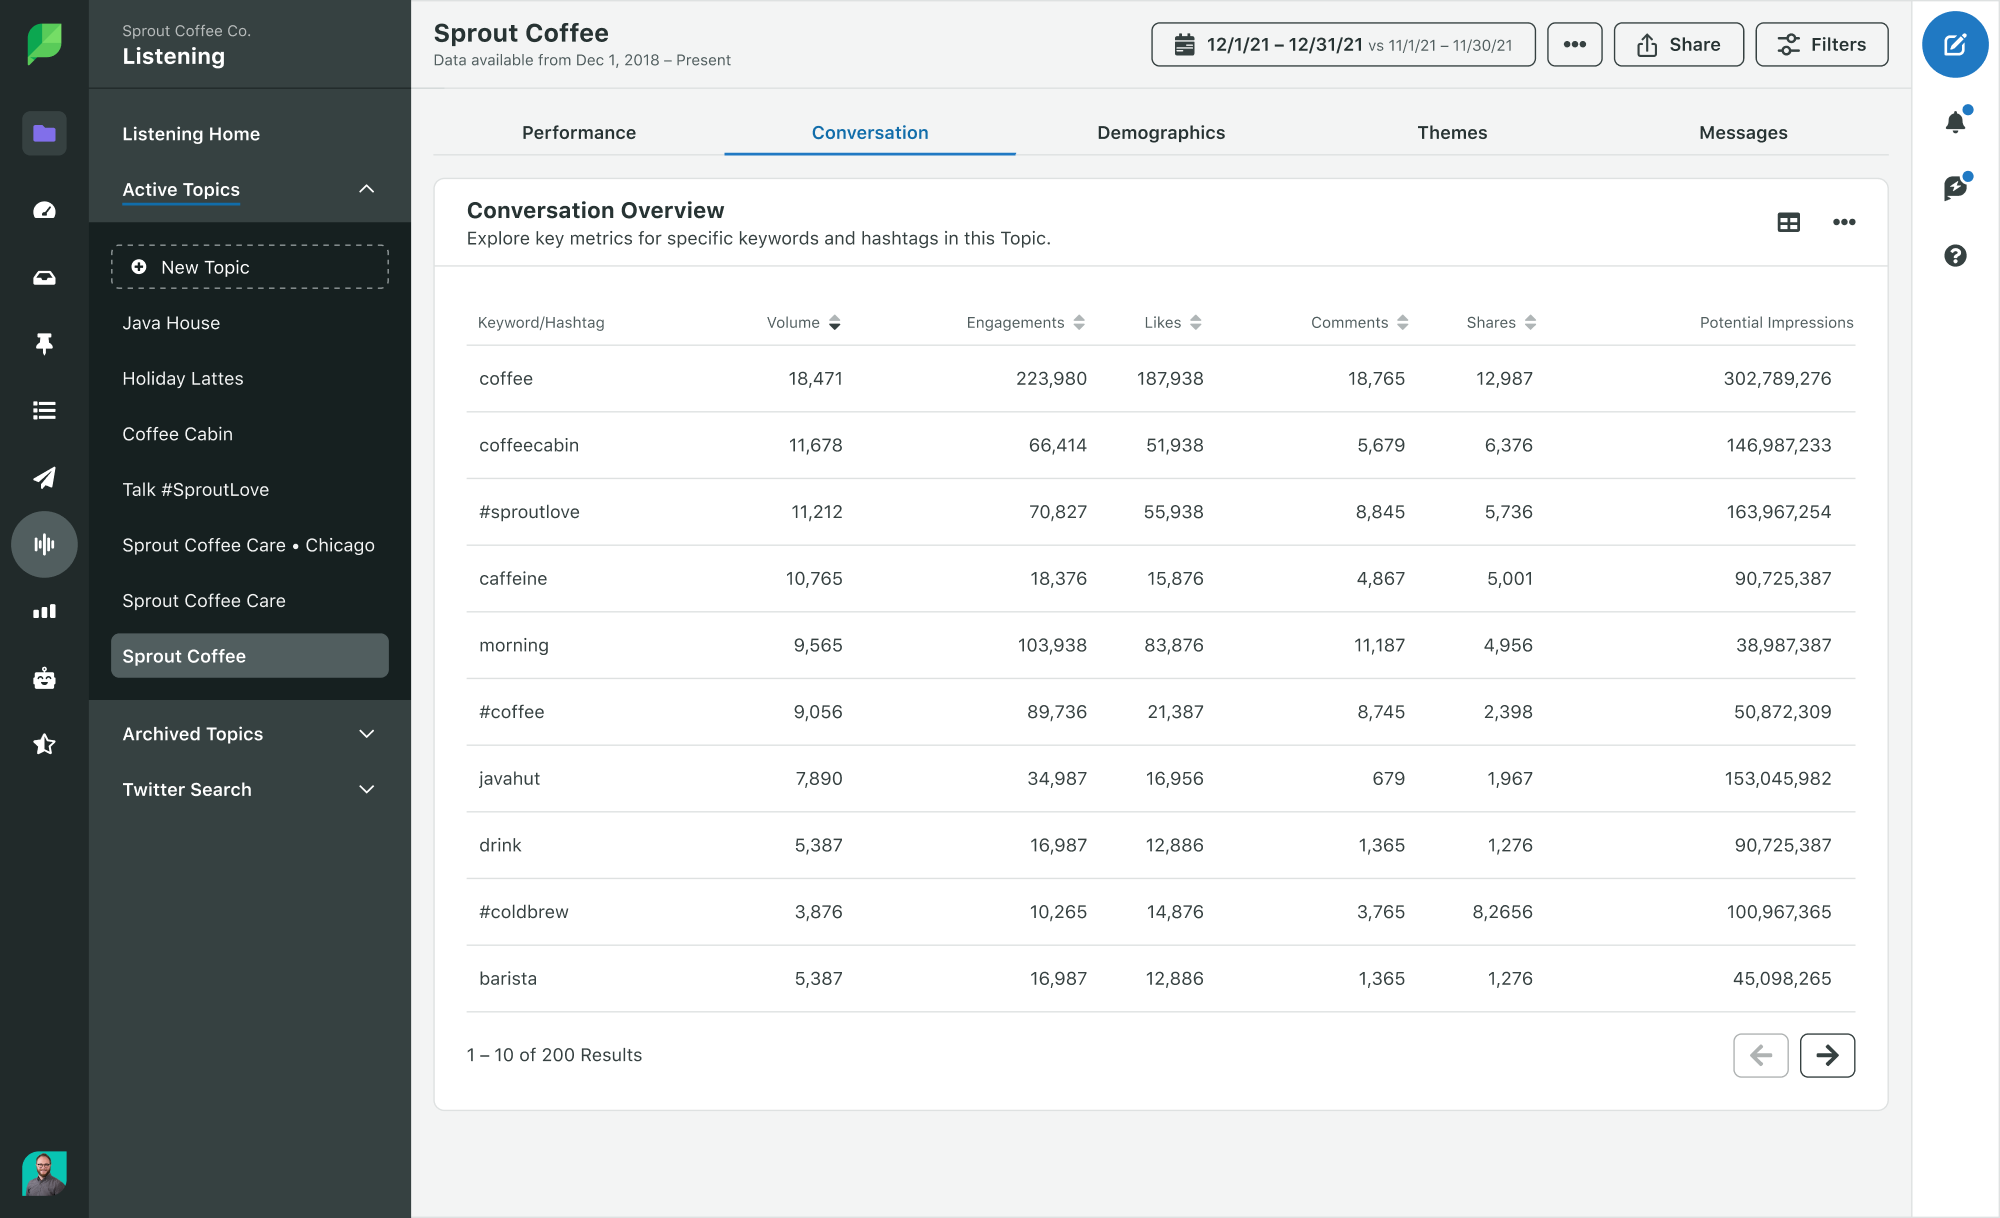 A preview of Sprout's Listening Conversation Overview which demonstrates trending keywords and hashtags popular on social.